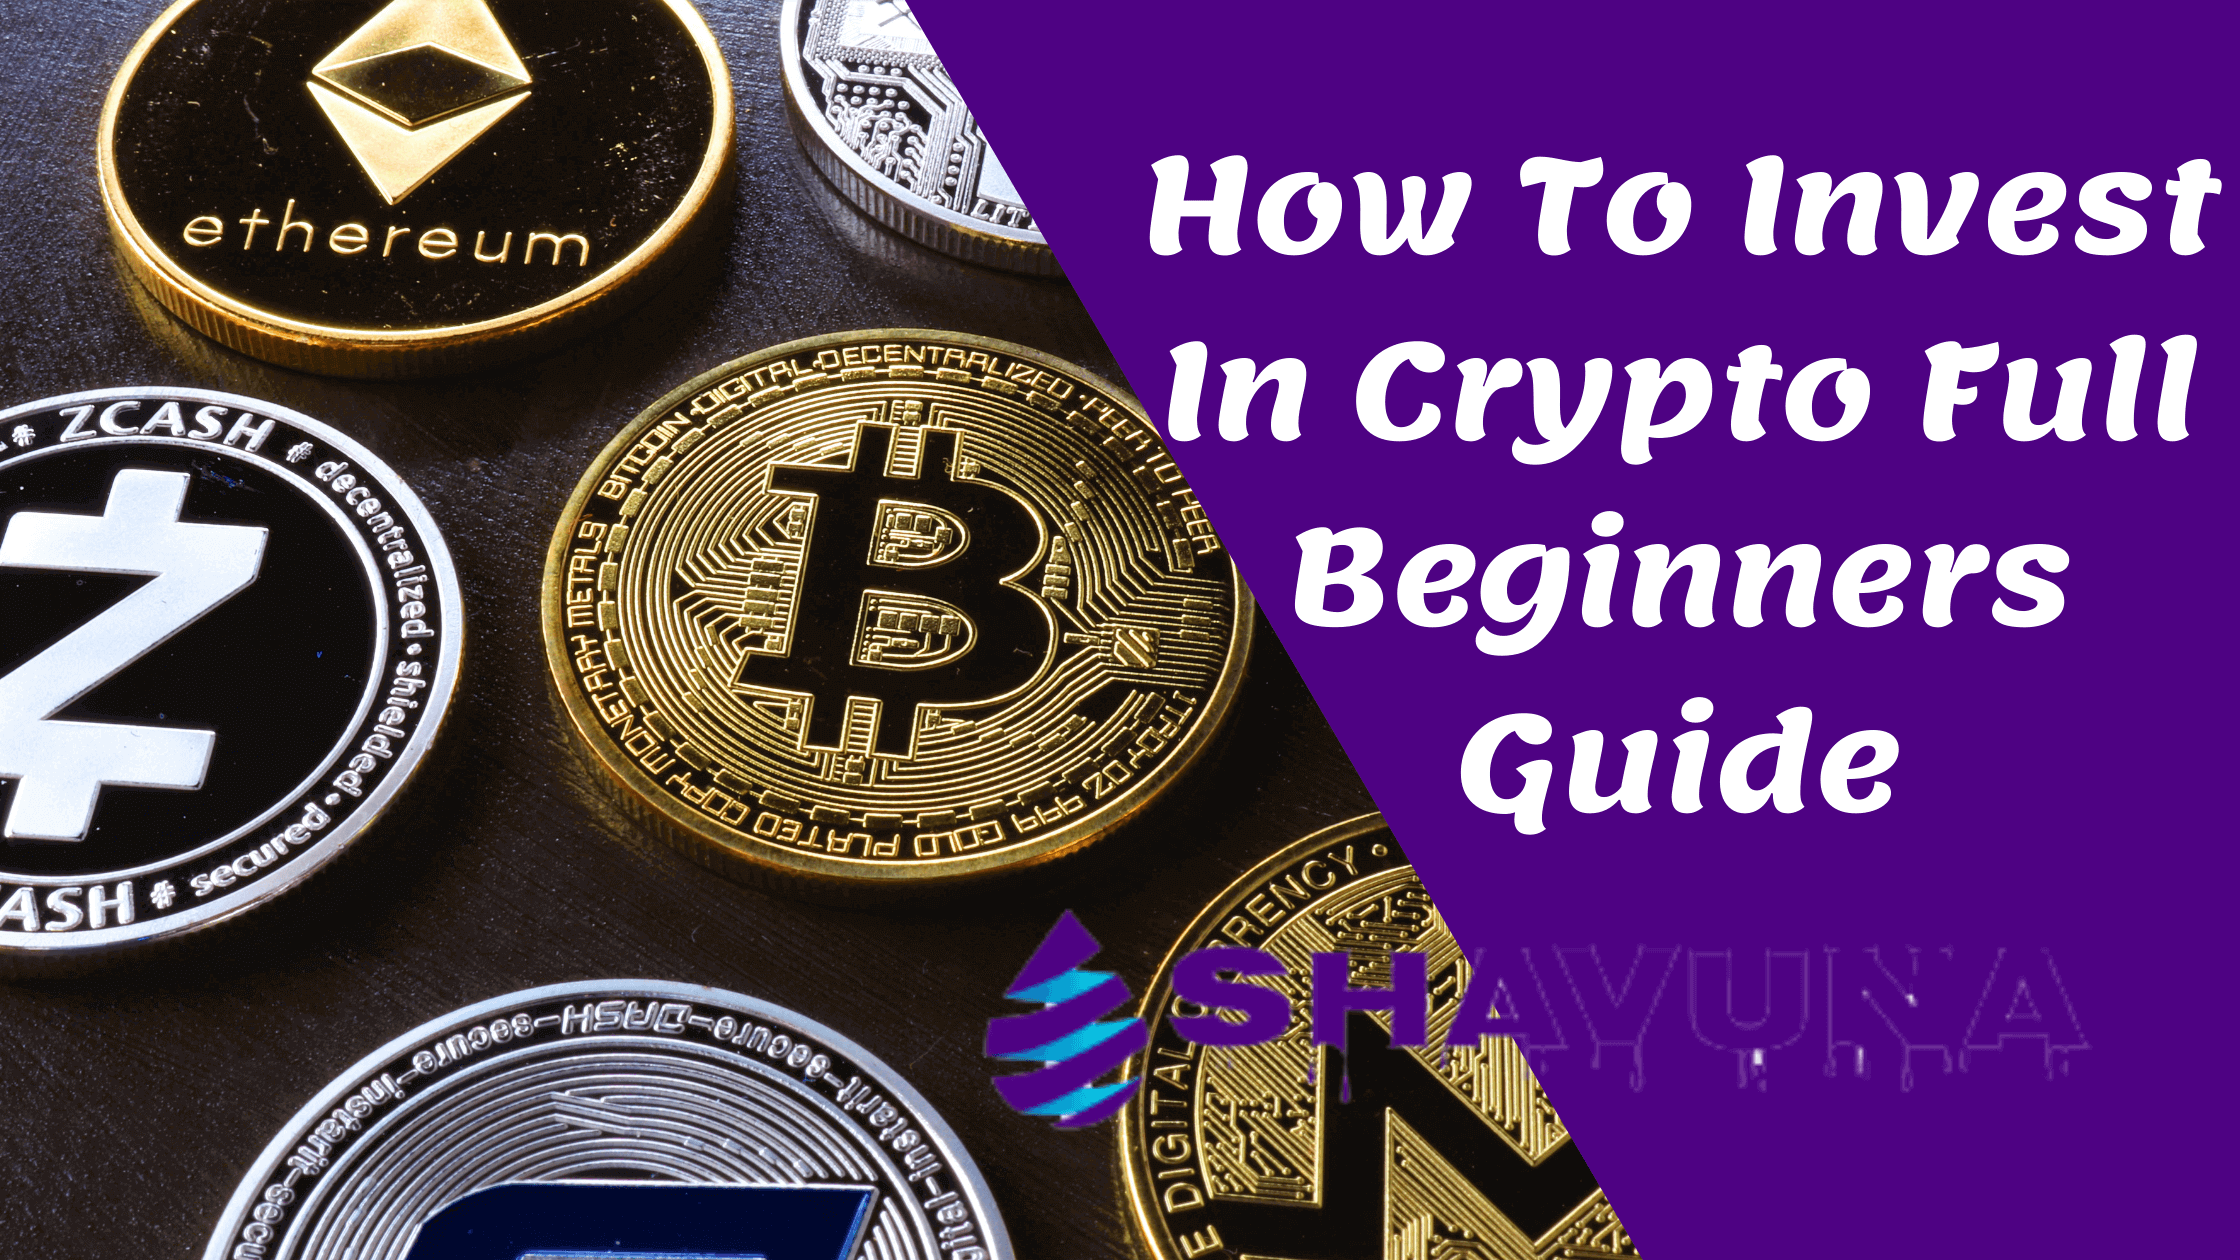 How To Invest In Crypto Full Beginners Guide in 2021 ~ Shavuna